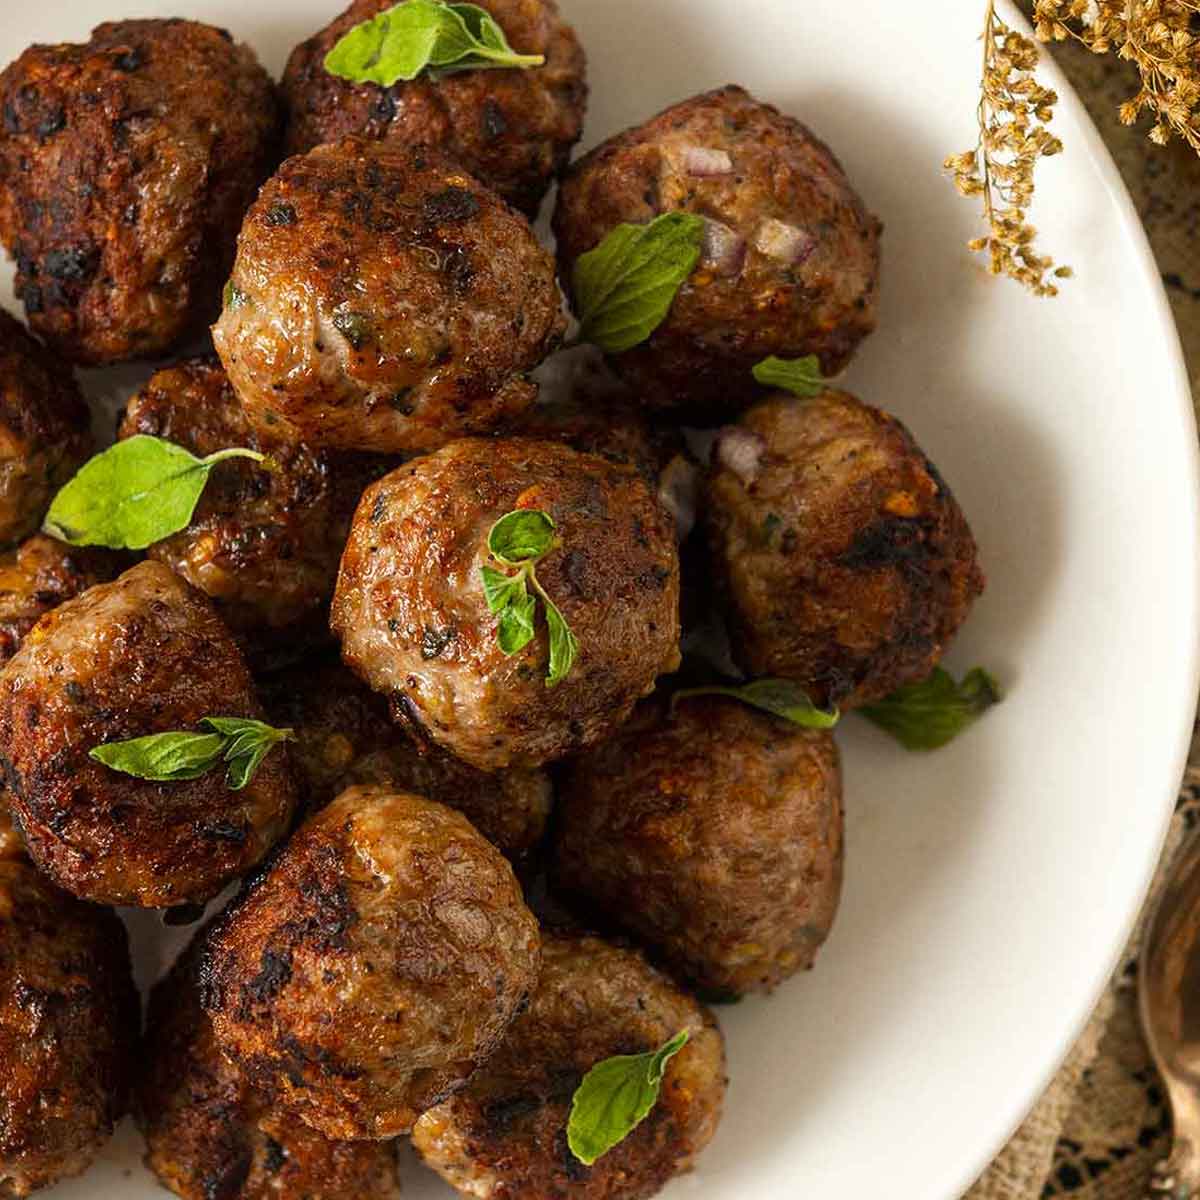 About 15 meatballs in a bowl, sprinkled with fresh oregano.